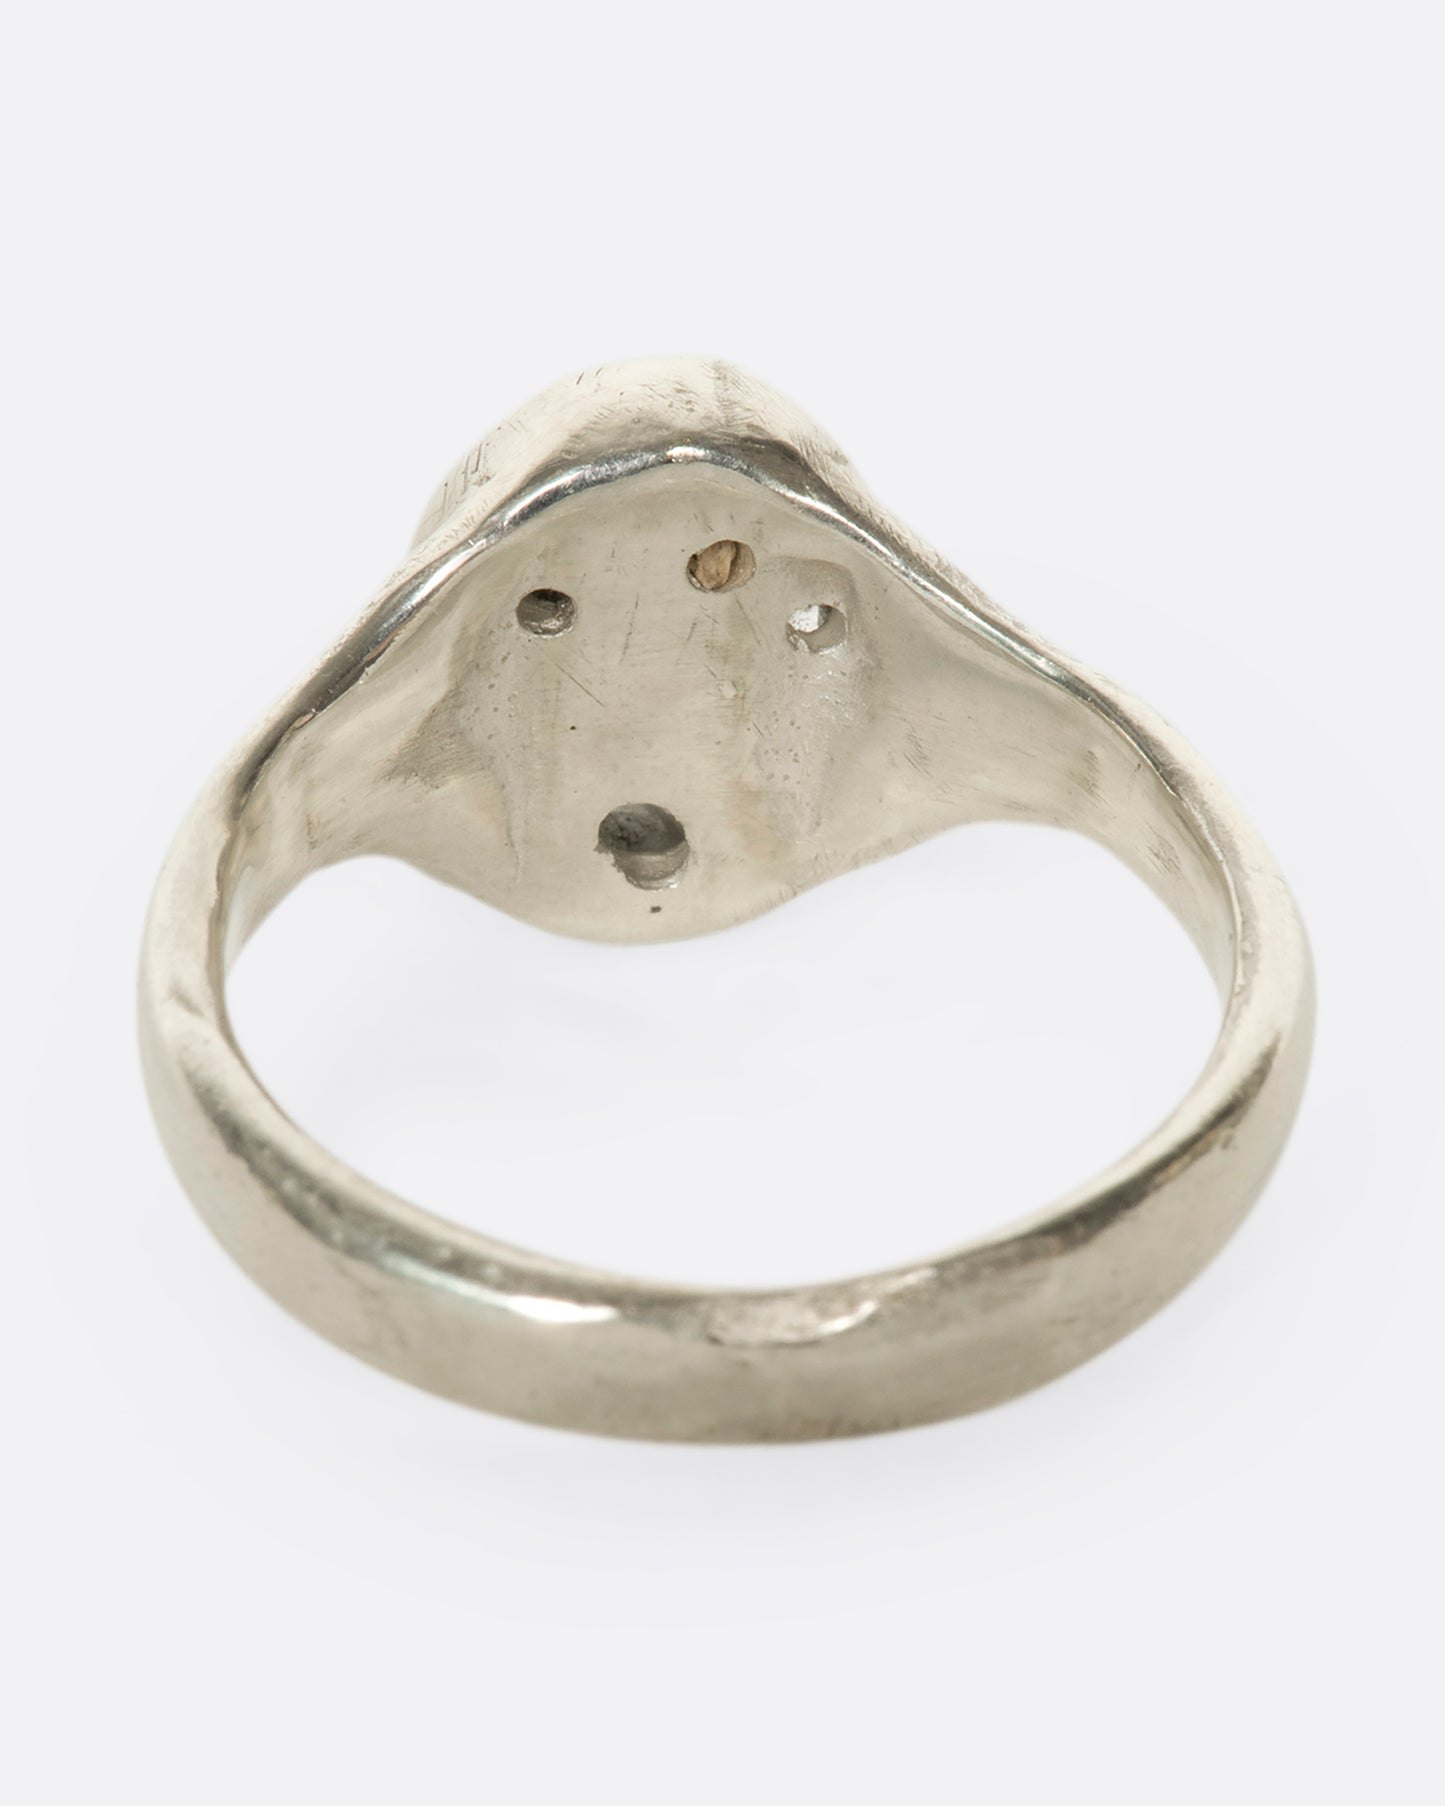 The underside view of an oval silver ring with grey diamonds.